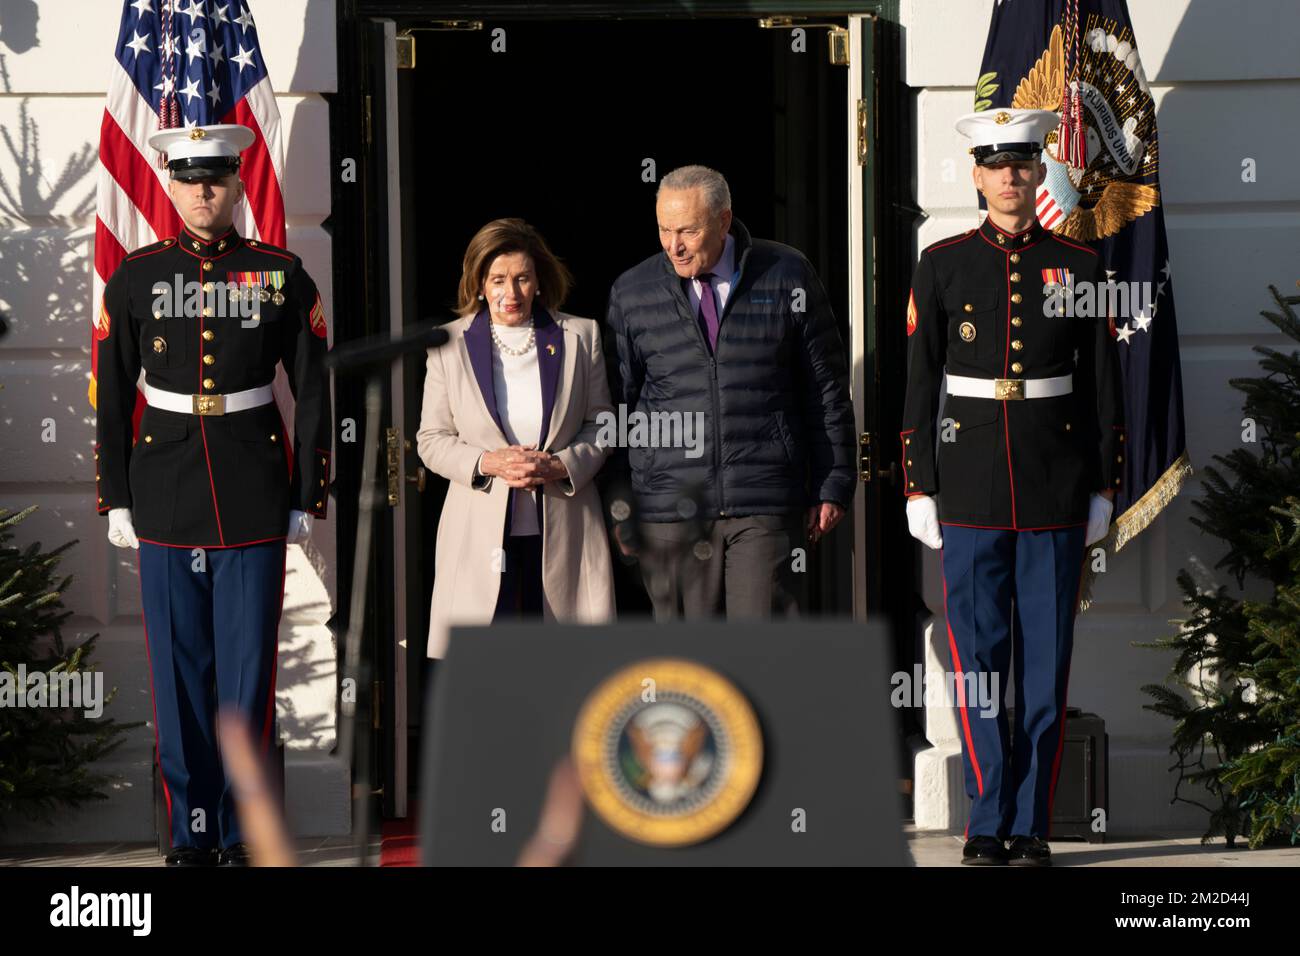 United States Senate Majority Leader Chuck Schumer (Democrat of New York) and Speaker of the United States House of Representatives Nancy Pelosi (Democrat of California) arrive before United States President Joe Biden hosts a ceremony to sign the Respect for Marriage Act on the South Lawn of the White House in Washington, DC on Tuesday, December 13, 2022. Credit: Chris Kleponis/Pool via CNP /MediaPunch Stock Photo